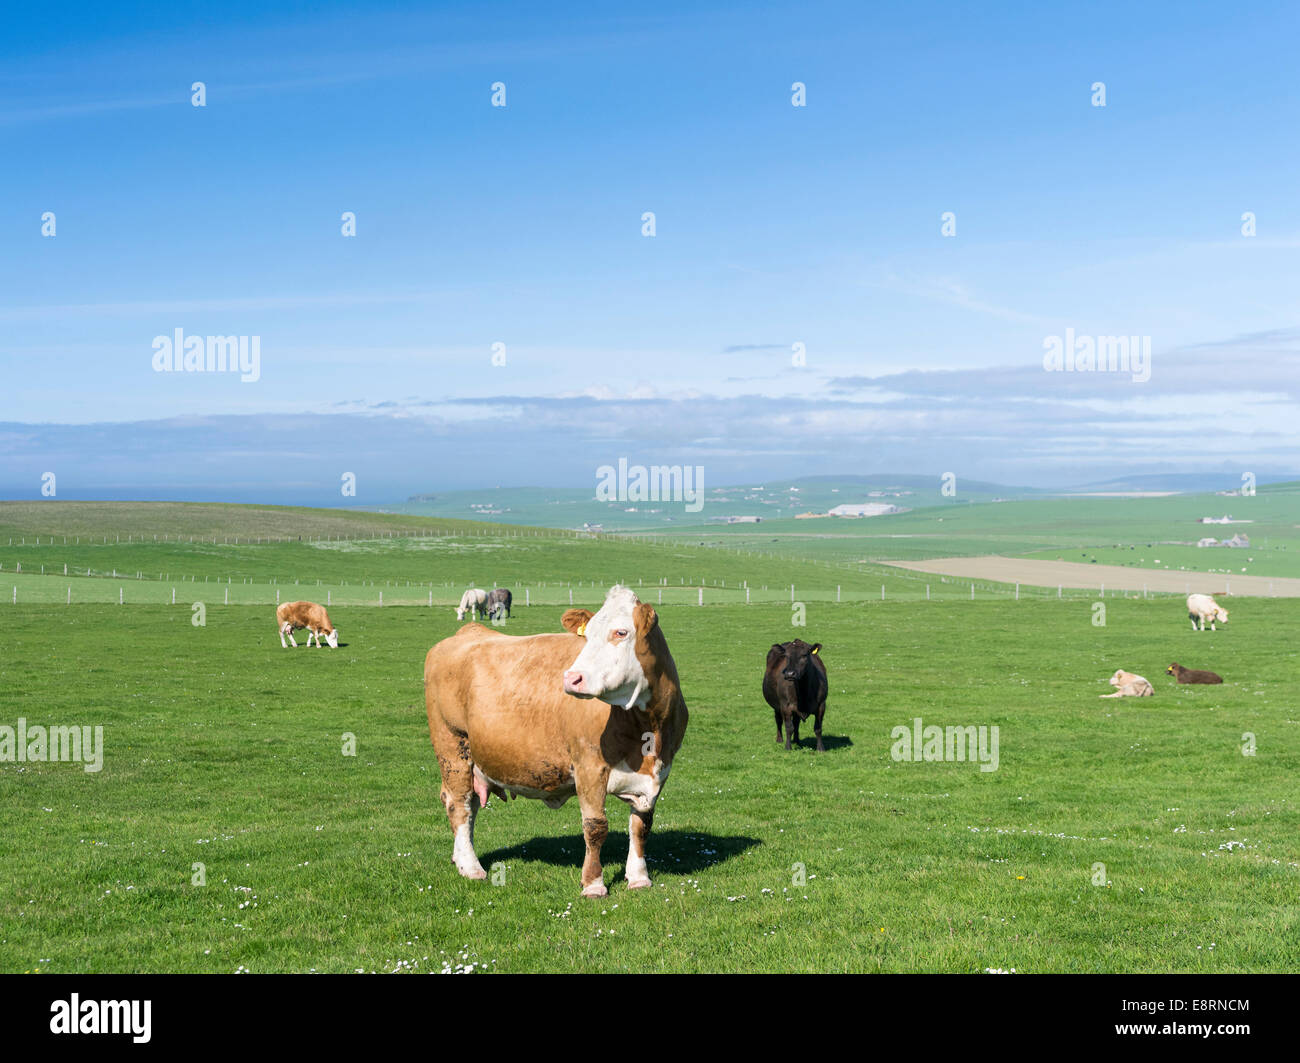 Cattle farming, Dairy and meat production are the most important parts of the agriculture in the Orkney Islands, Scotland. Stock Photo